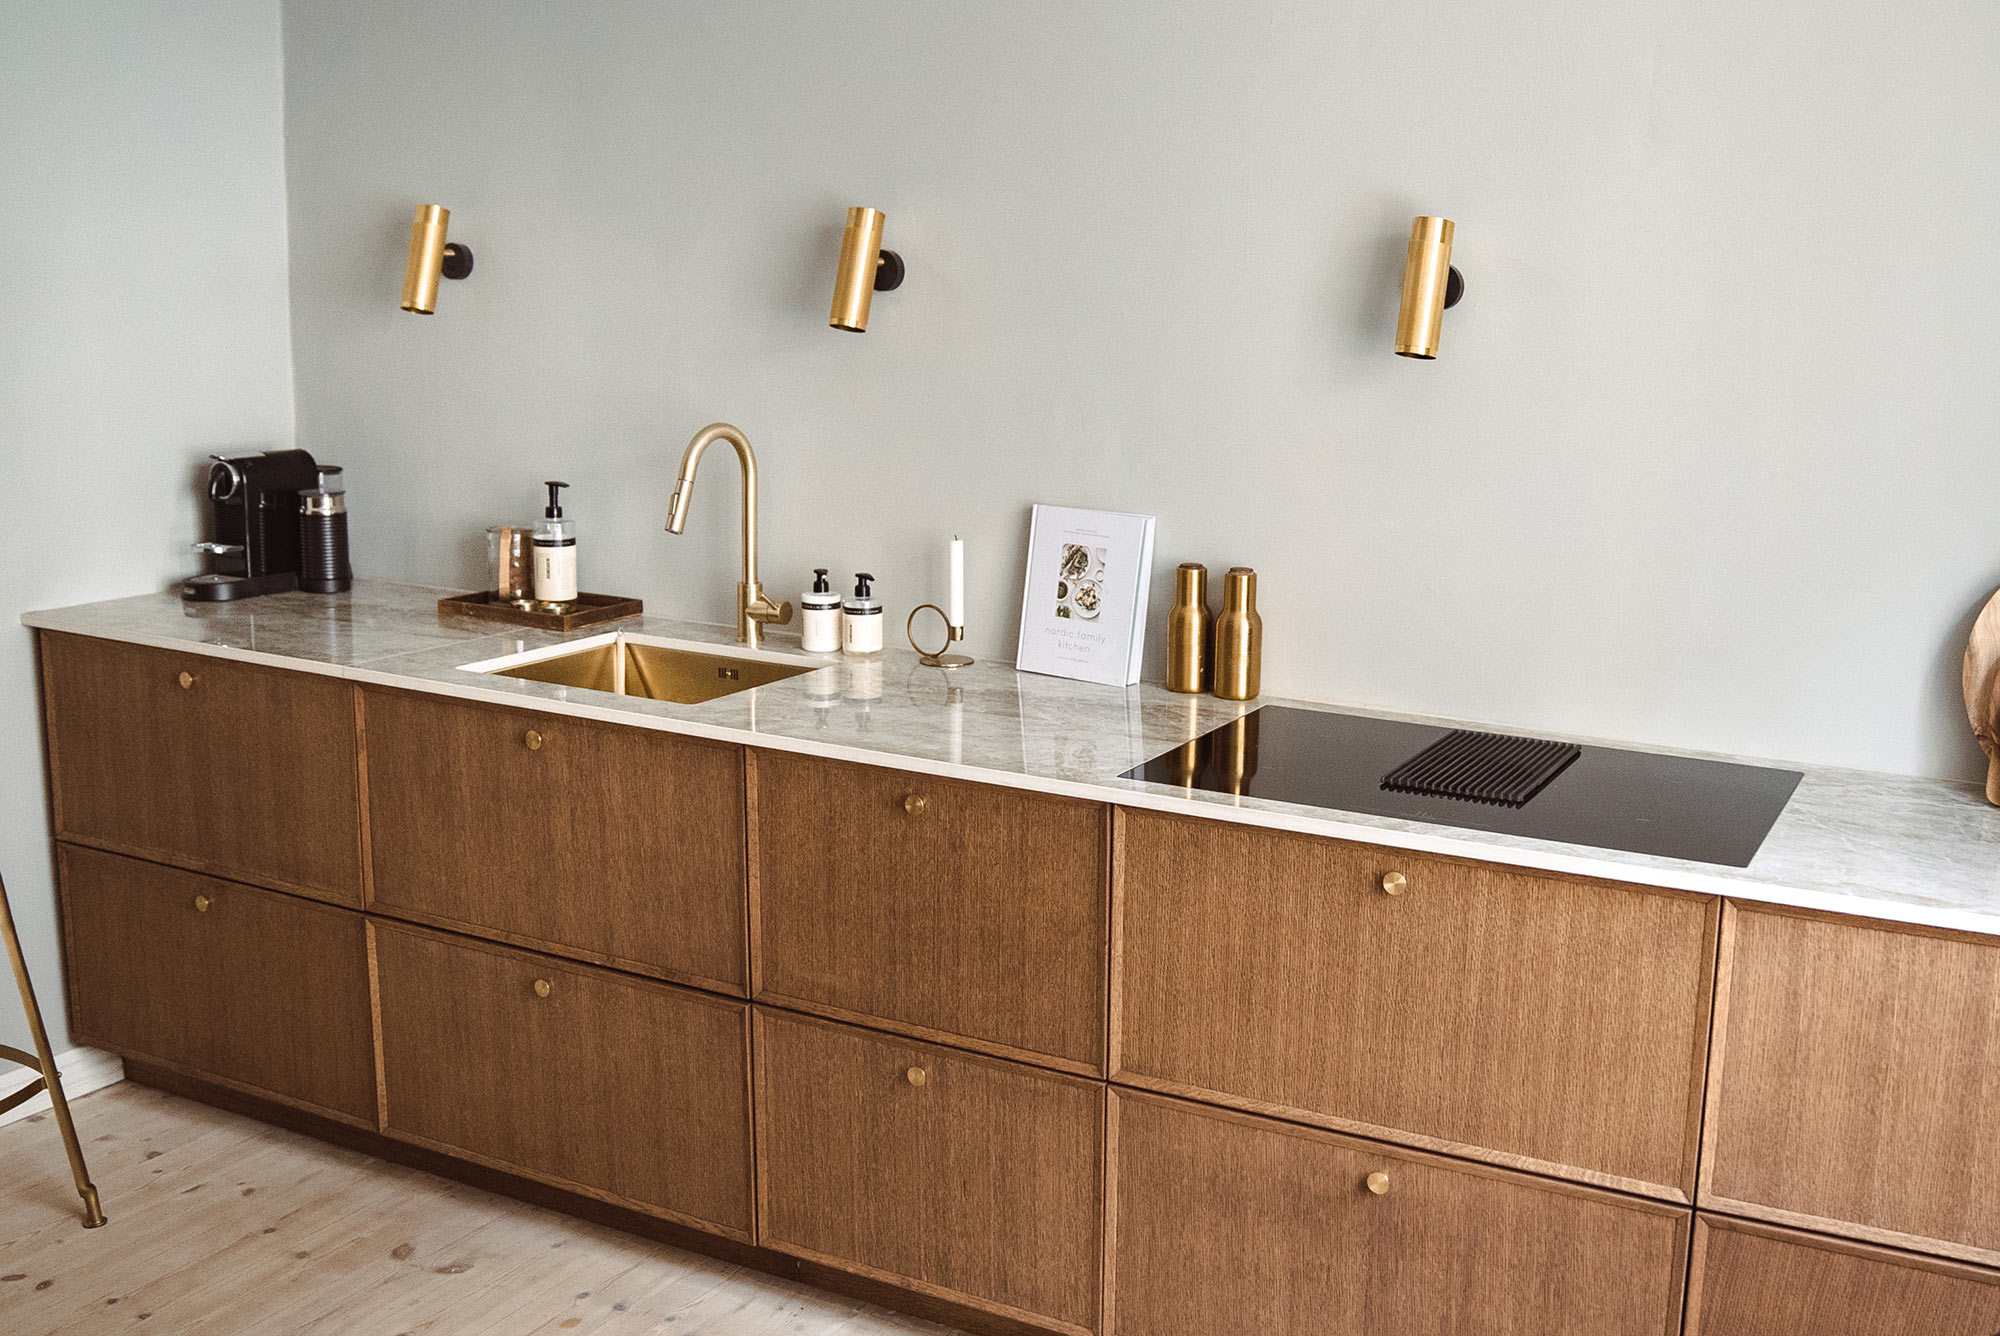 Image of Rasmus Malling 5 in A warm and sophisticated kitchen with extra sparkle and texture thanks to Dekton - Cosentino